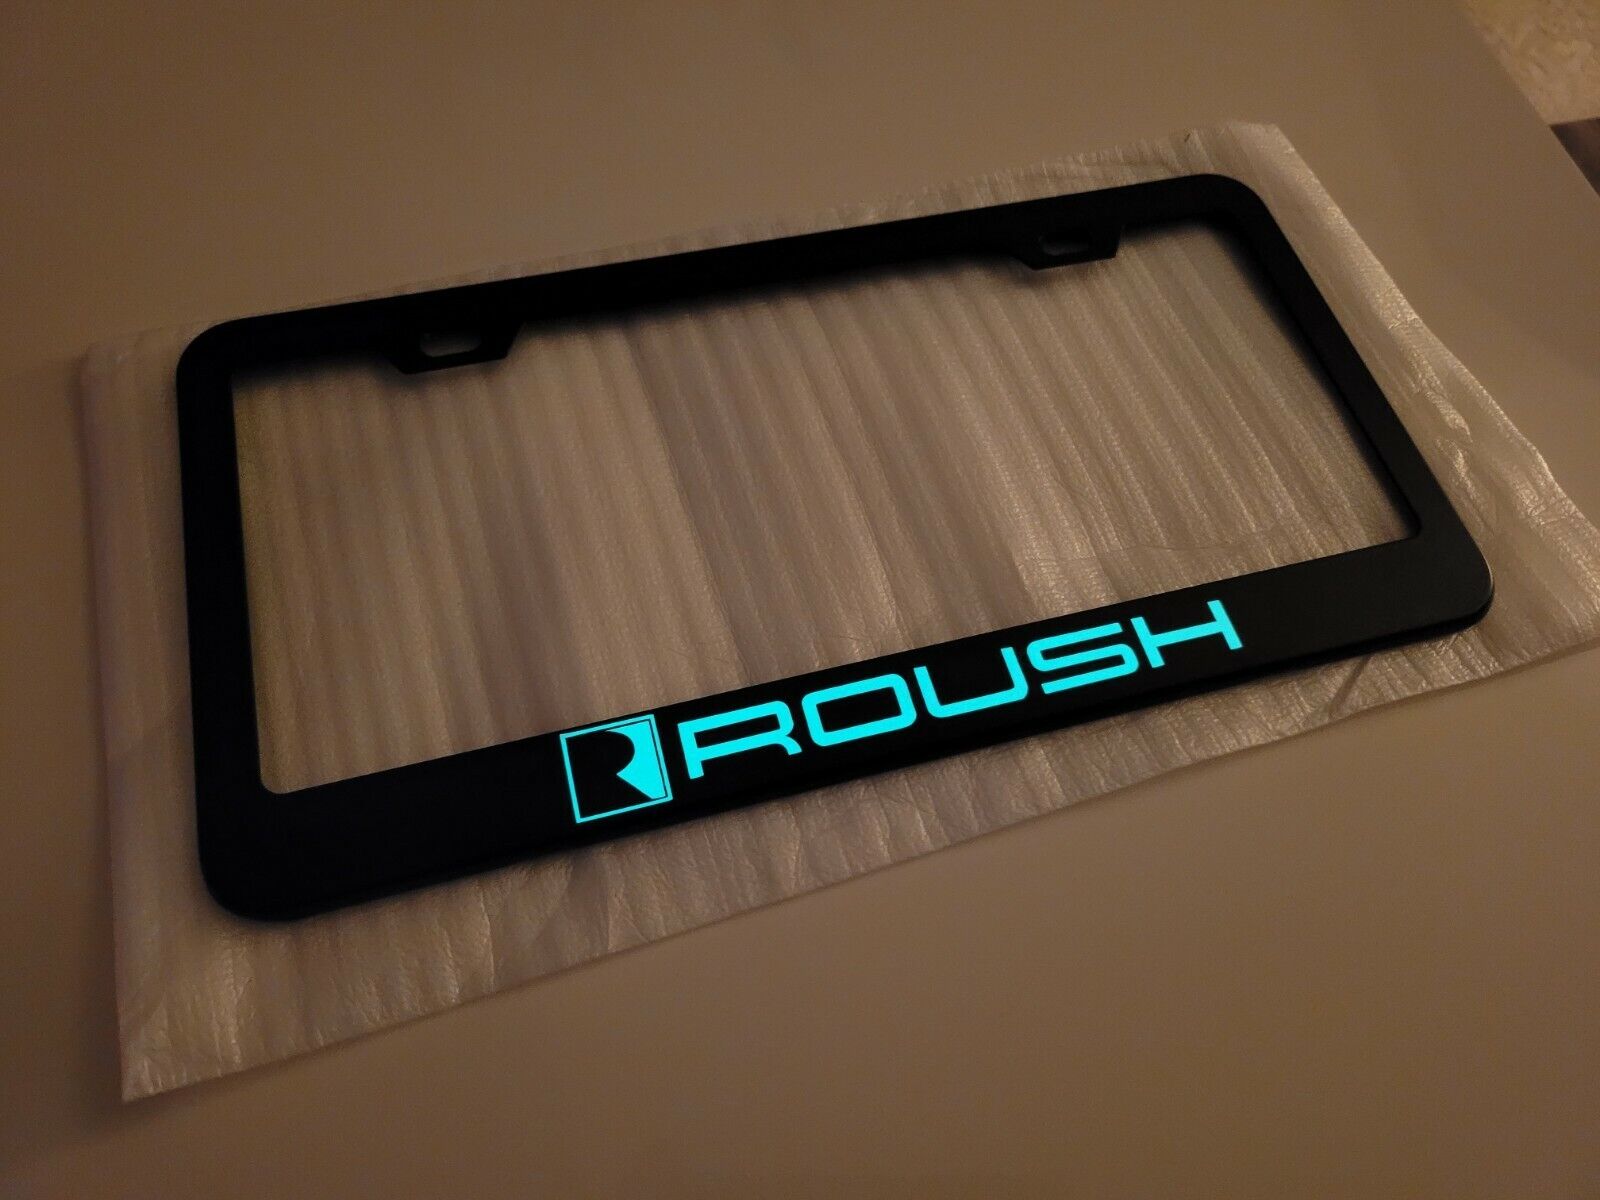 (Glowing) Roush Mustang Stainlese Steel License Plate Frame